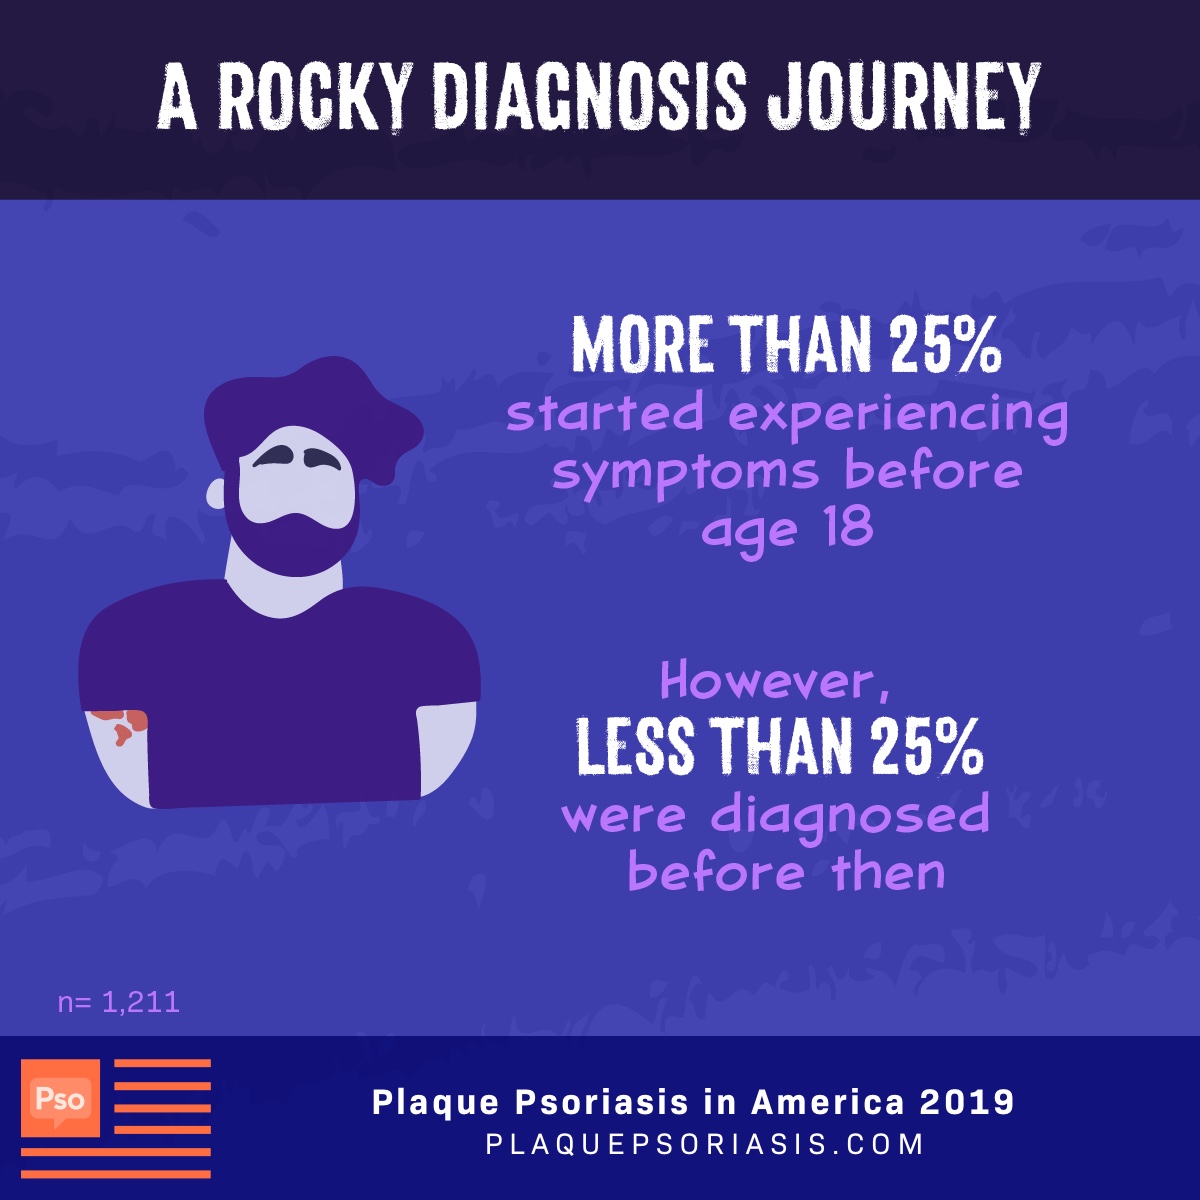 While more than 25% started getting psoriasis symptoms before age 18, less than 25% were diagnosed before then. 